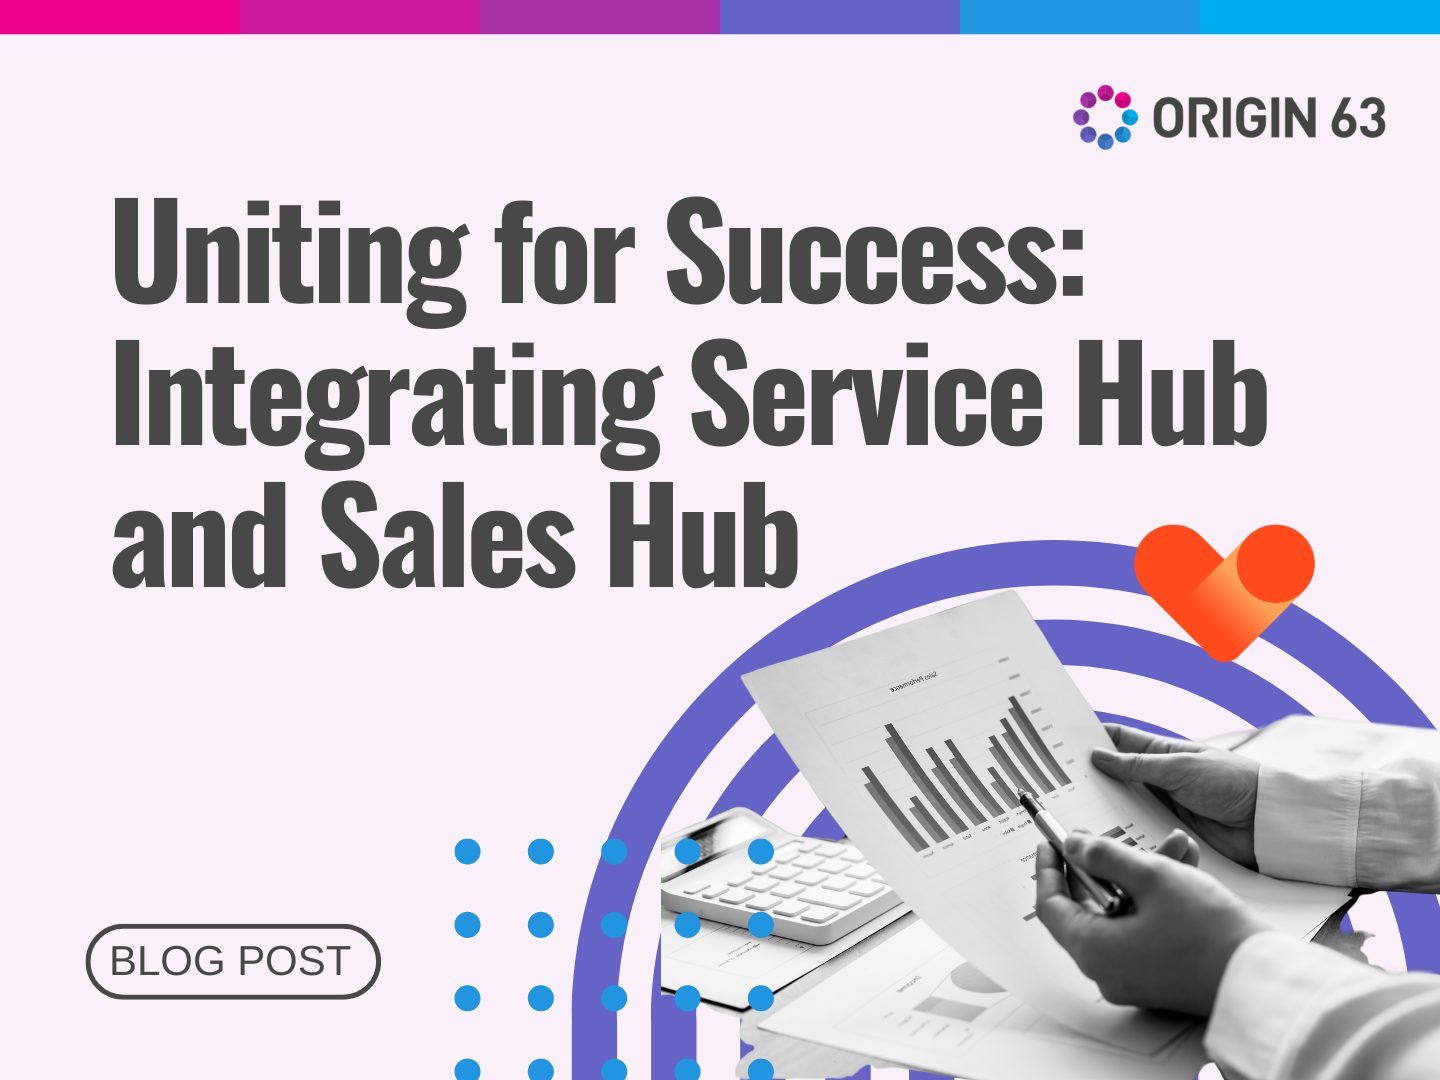 Discover how integrating Service Hub and Sales Hub can transform your customer experience and drive sustainable growth.